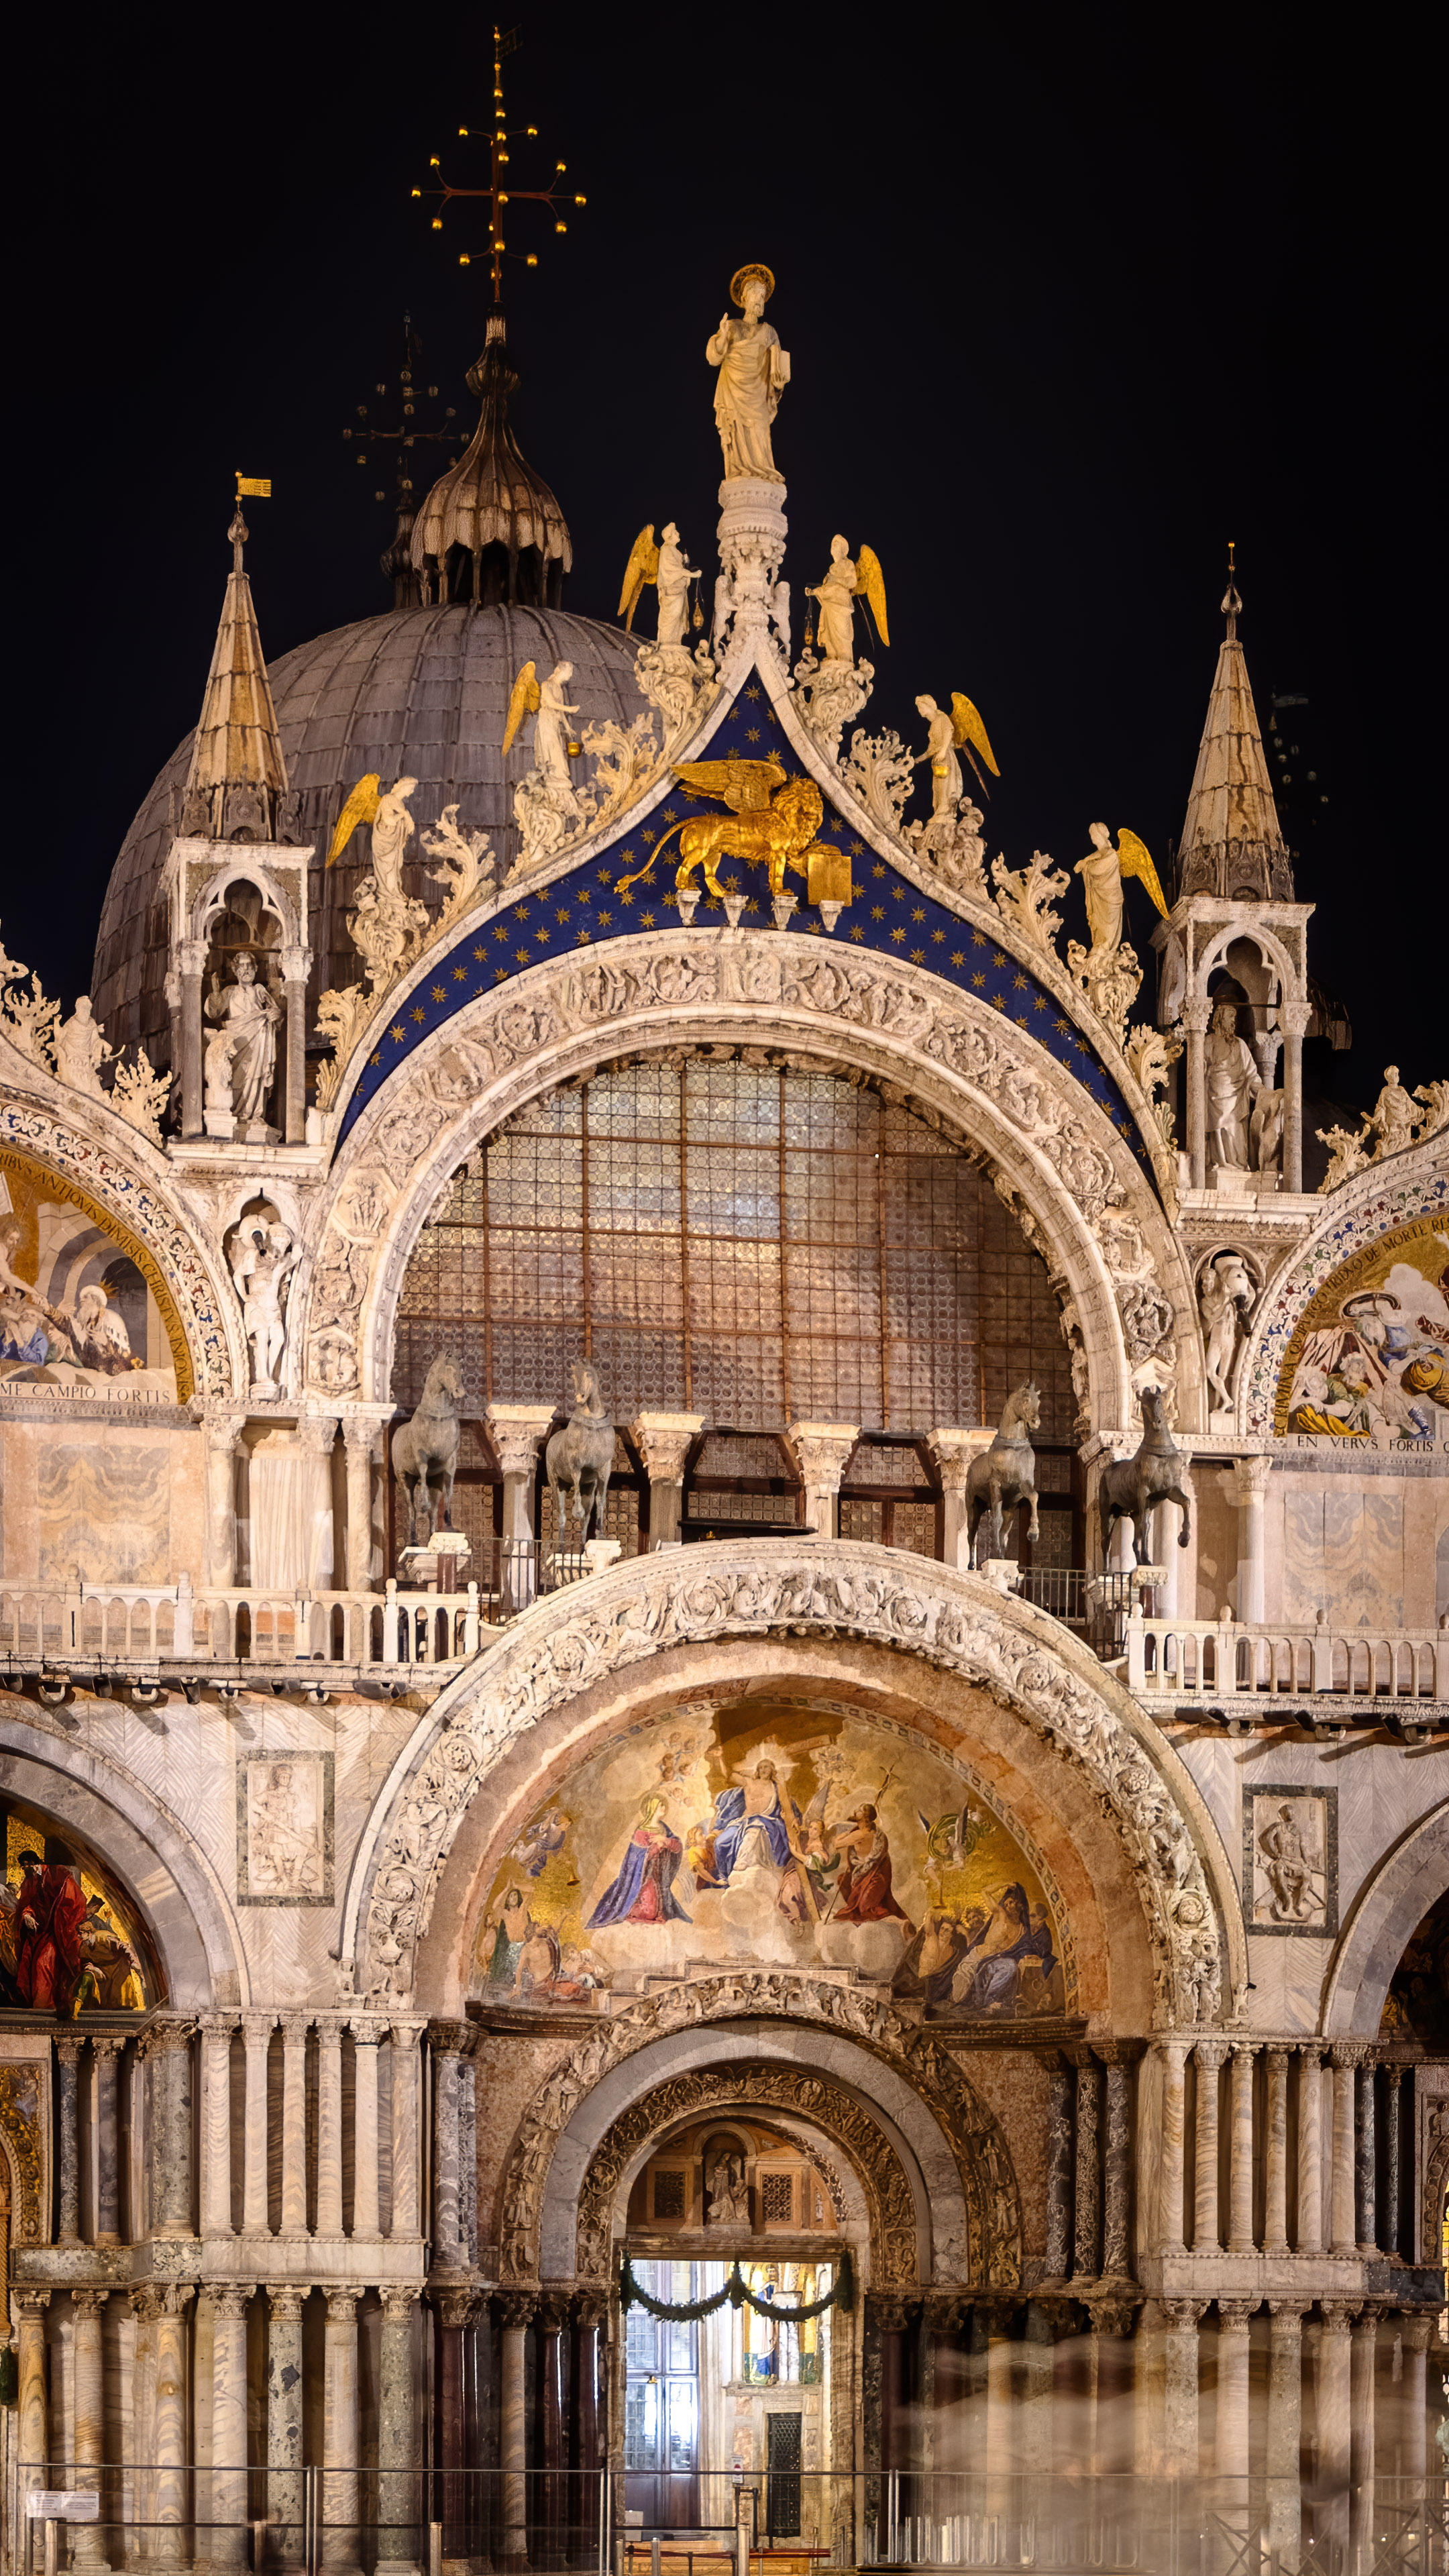 Admire the beauty of Venice's St Mark's Basilica under the moonlight with this captivating wallpaper. A great addition to your collection.